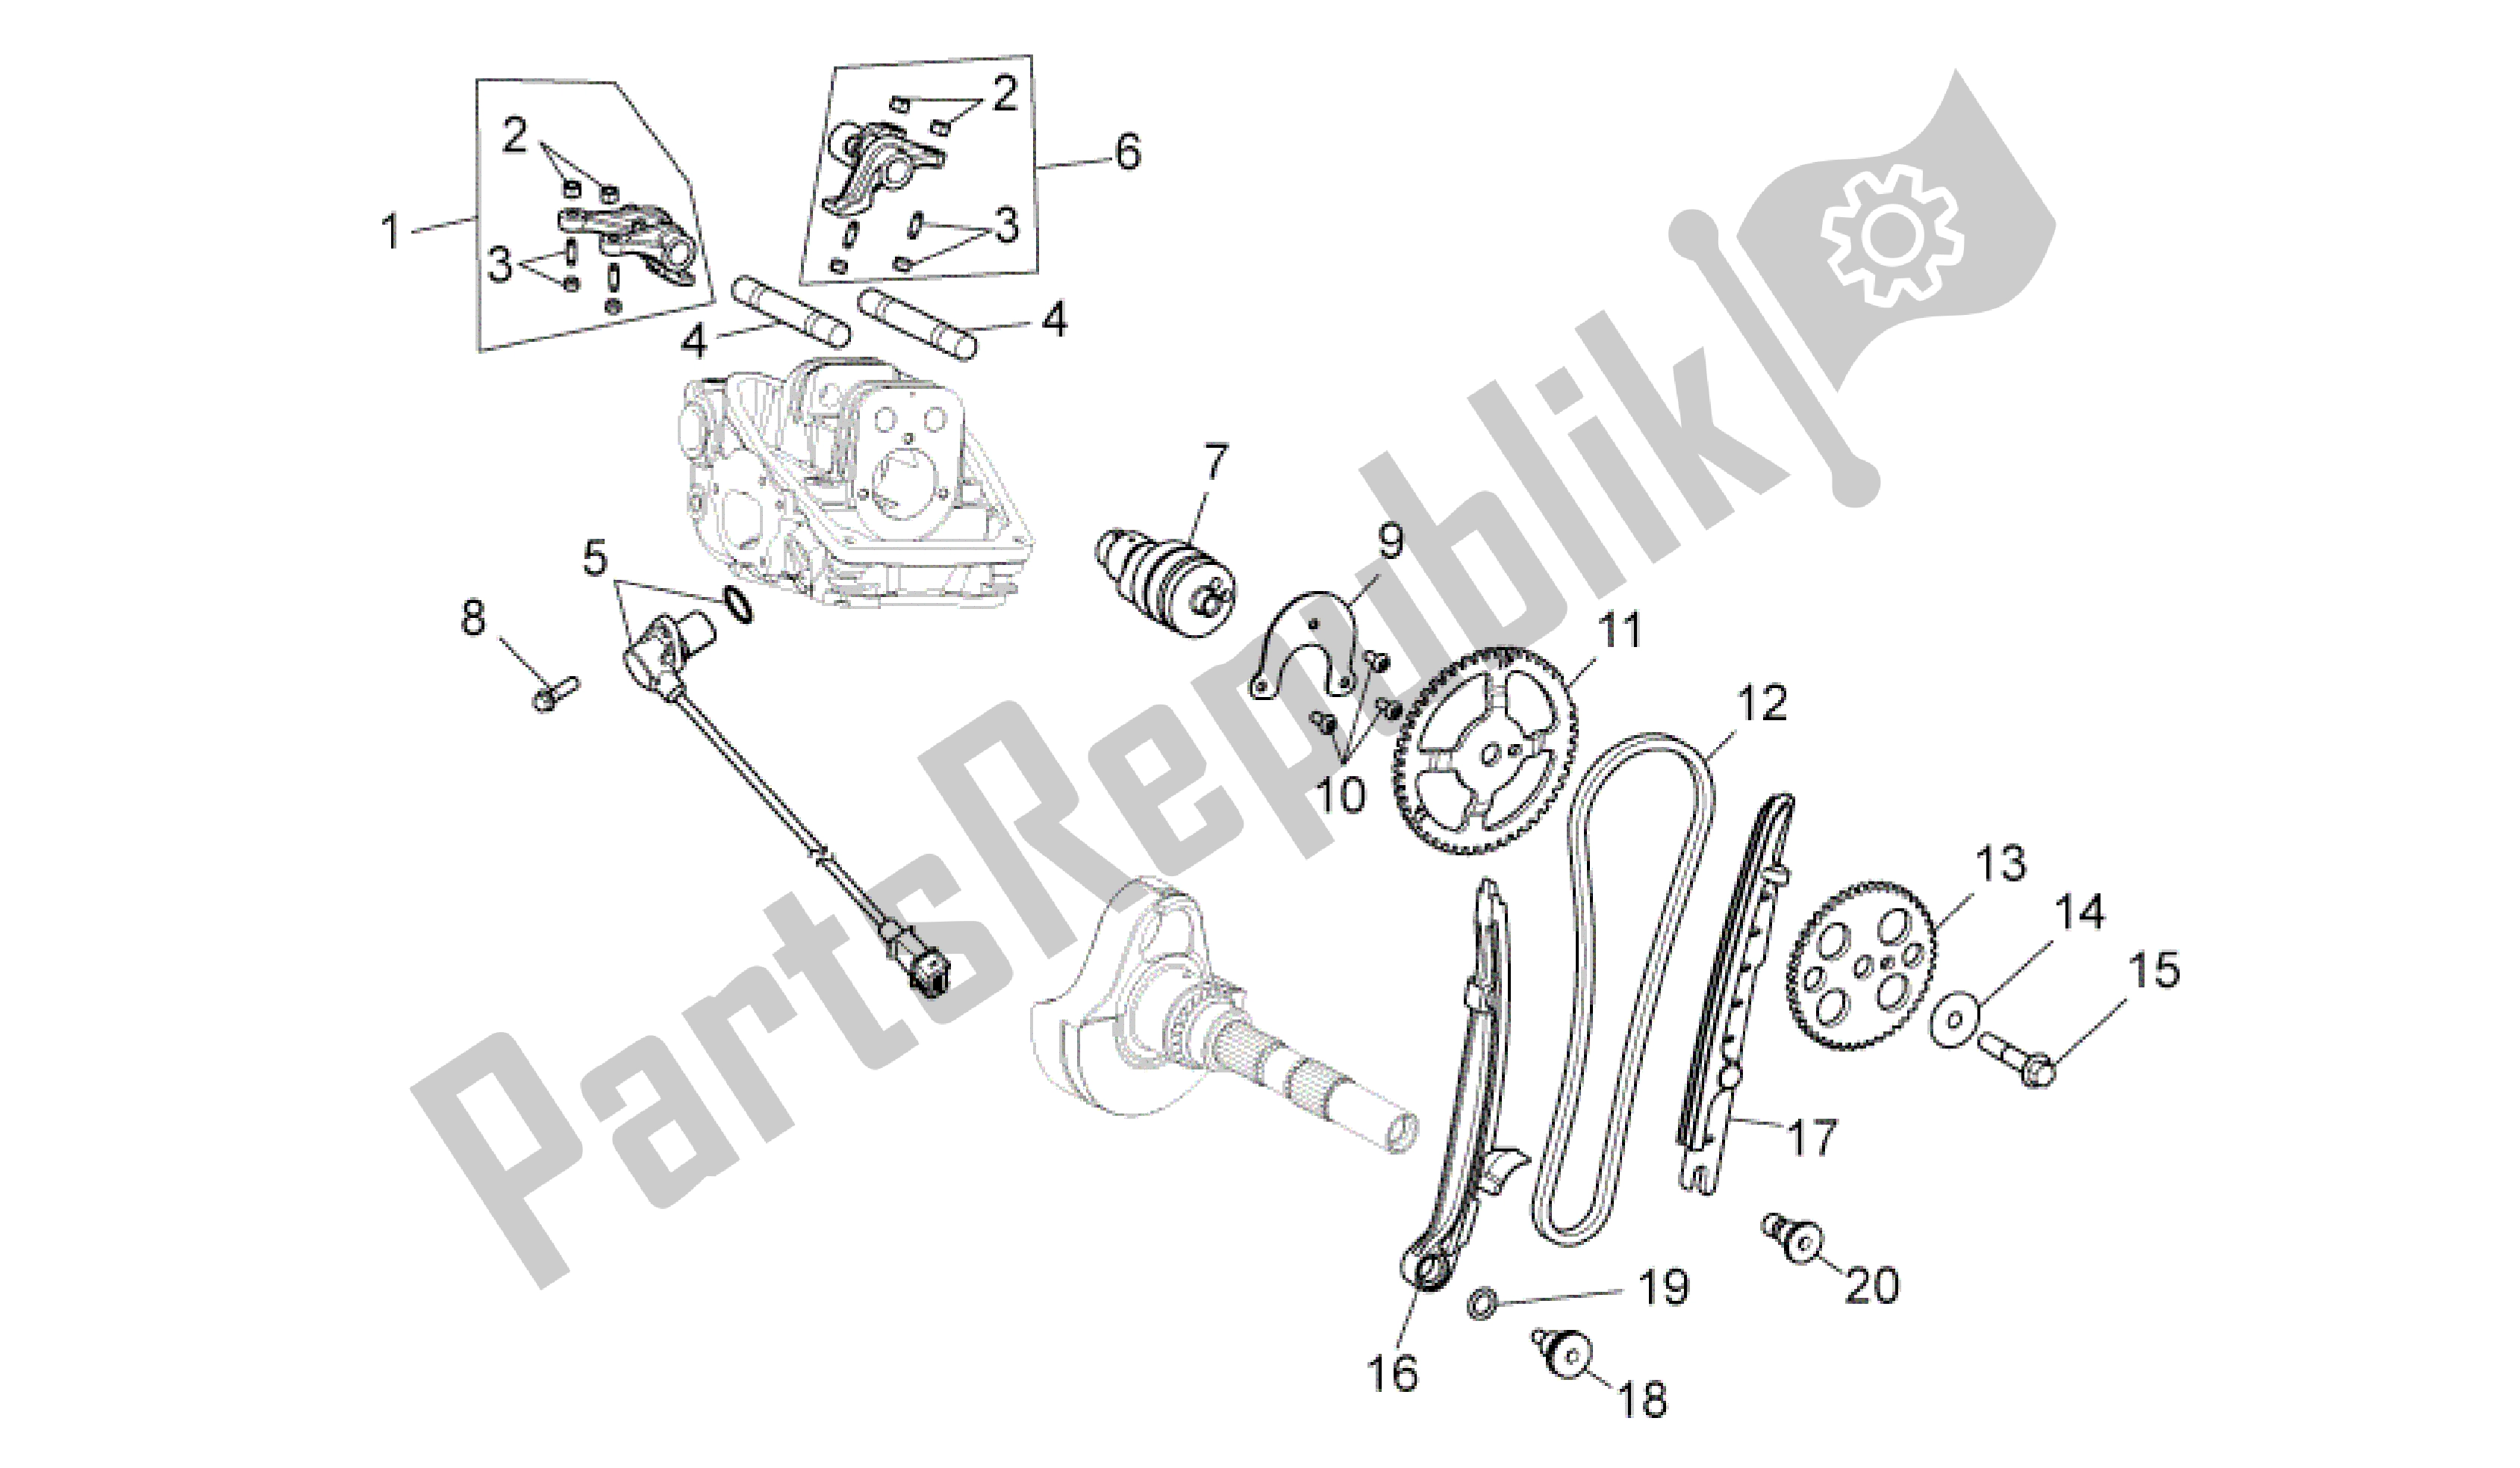 All parts for the Rear Cylinder Timing System of the Aprilia Mana 850 2009 - 2011